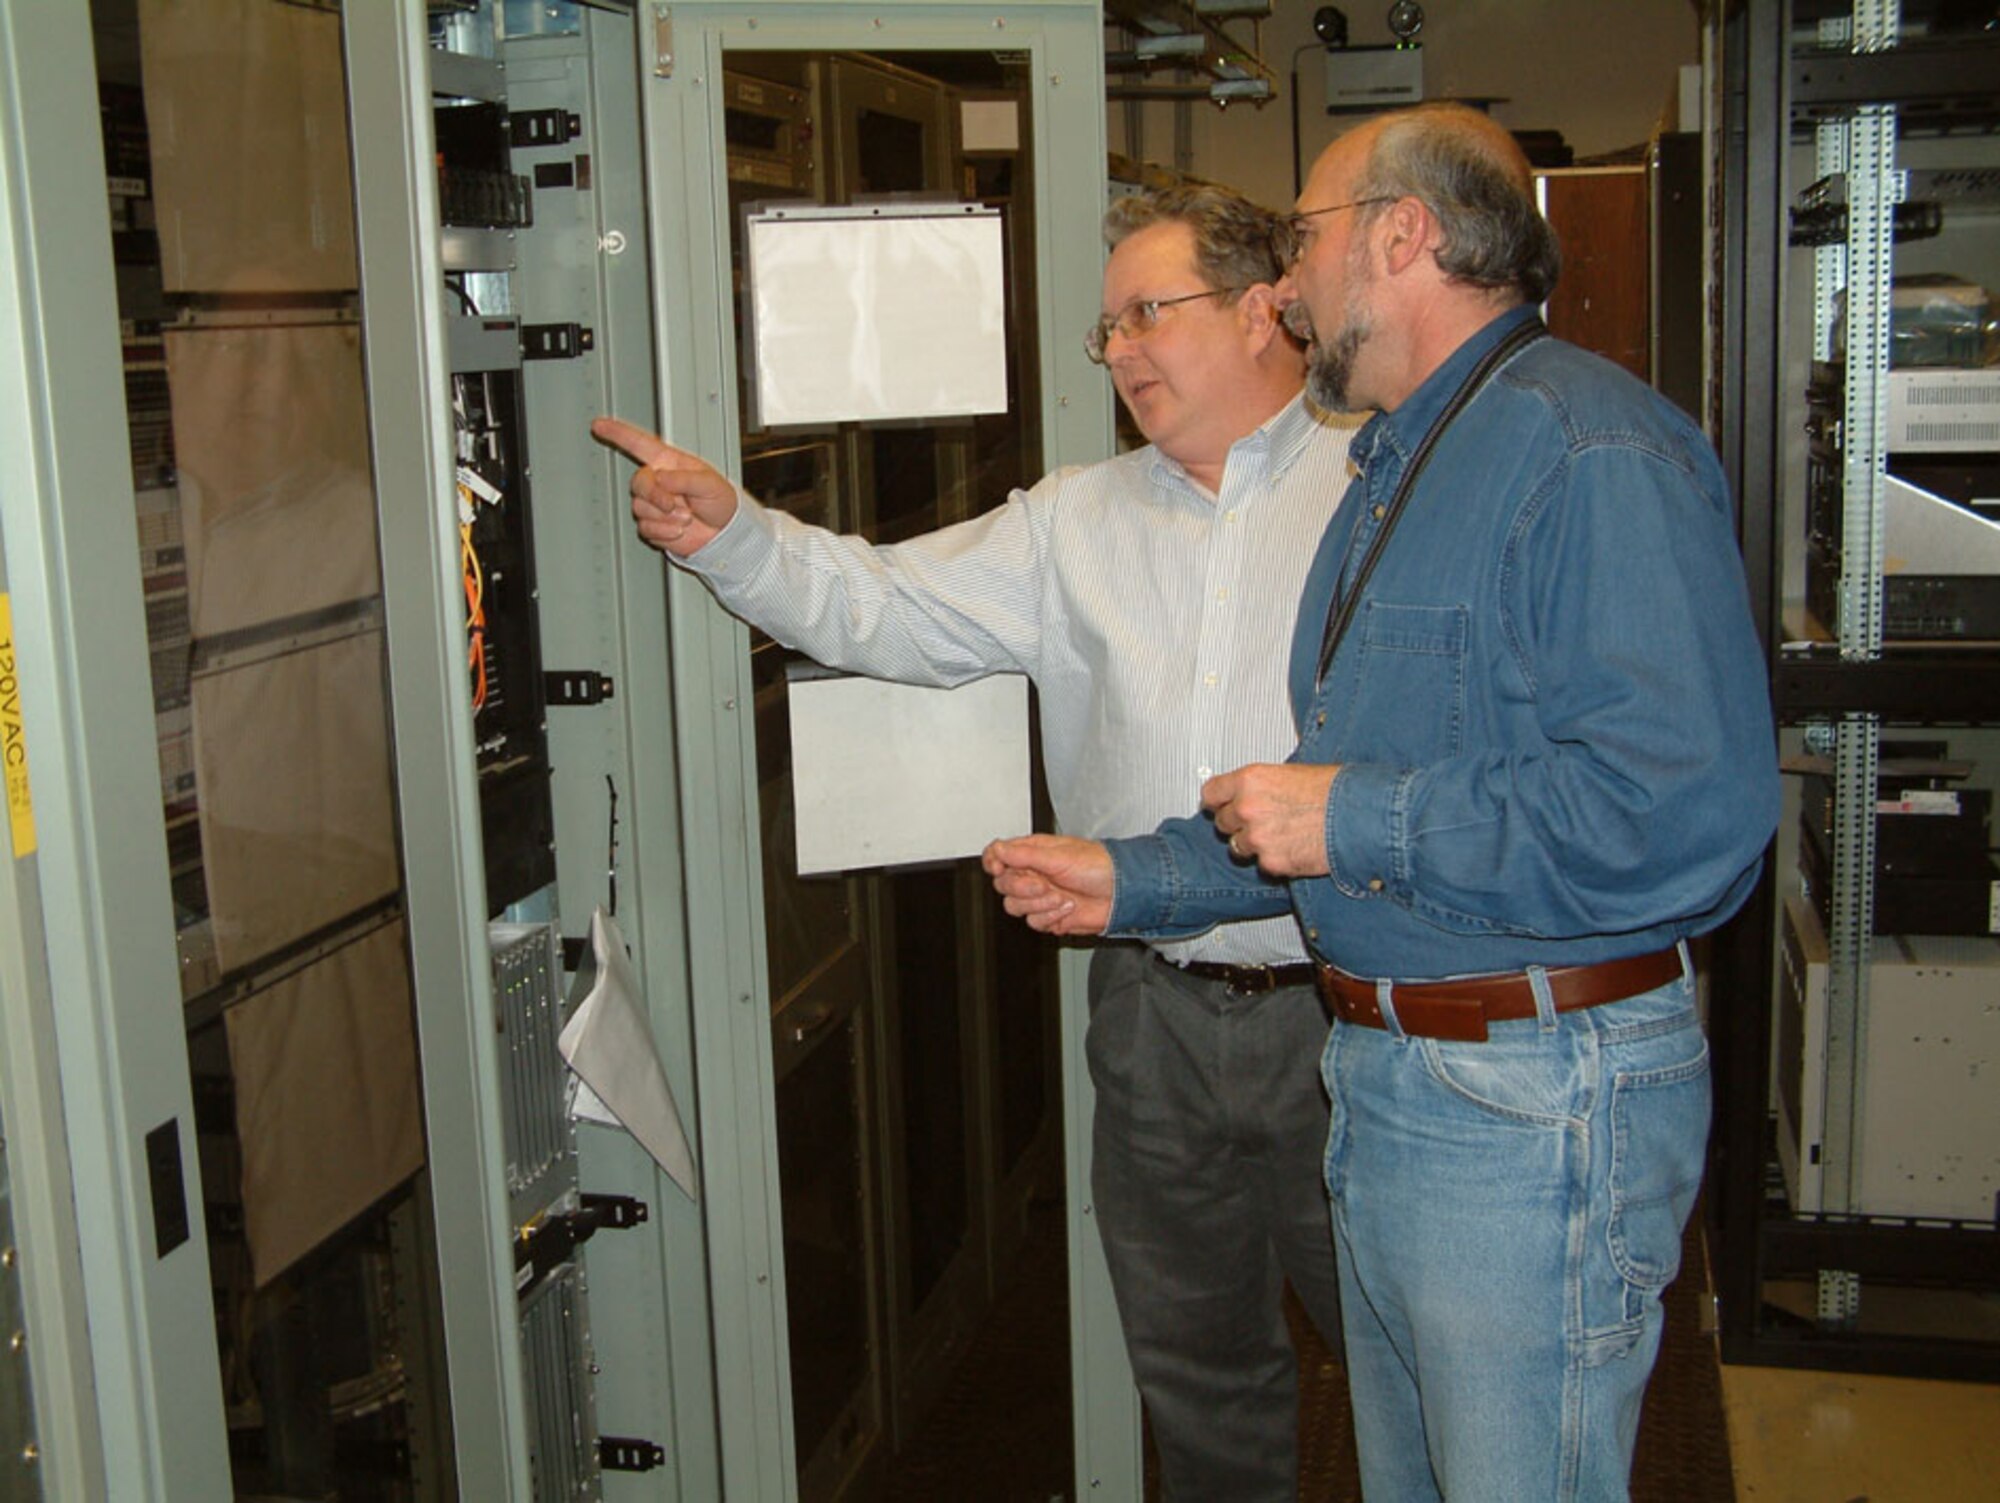 James Johnson and Michael Poli, U.S. Air Forces in Europe CSS Quality Assurance evaluators, conduct a contract surveillance at the Spangdahlem Technical Control Facility. The evaluators assess the contractor’s performance on the Northern Communications contract through scheduled and unscheduled surveillances at multiple sites throughout Europe.